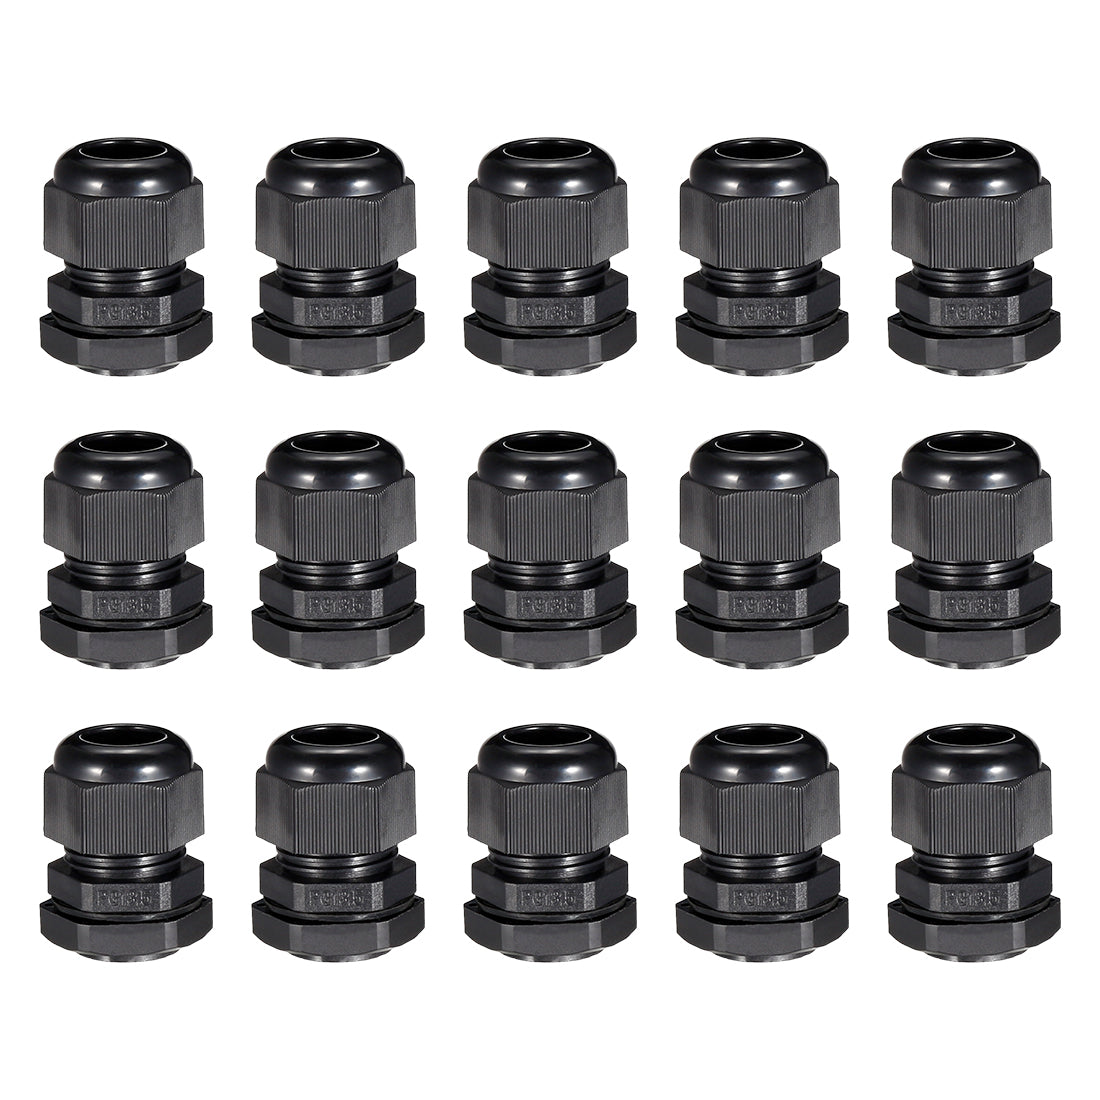 uxcell Uxcell 15Pcs PG13.5 Cable Gland Waterproof Plastic Joint Adjustable Locknut Black for 6mm-11mm Dia Cable Wire